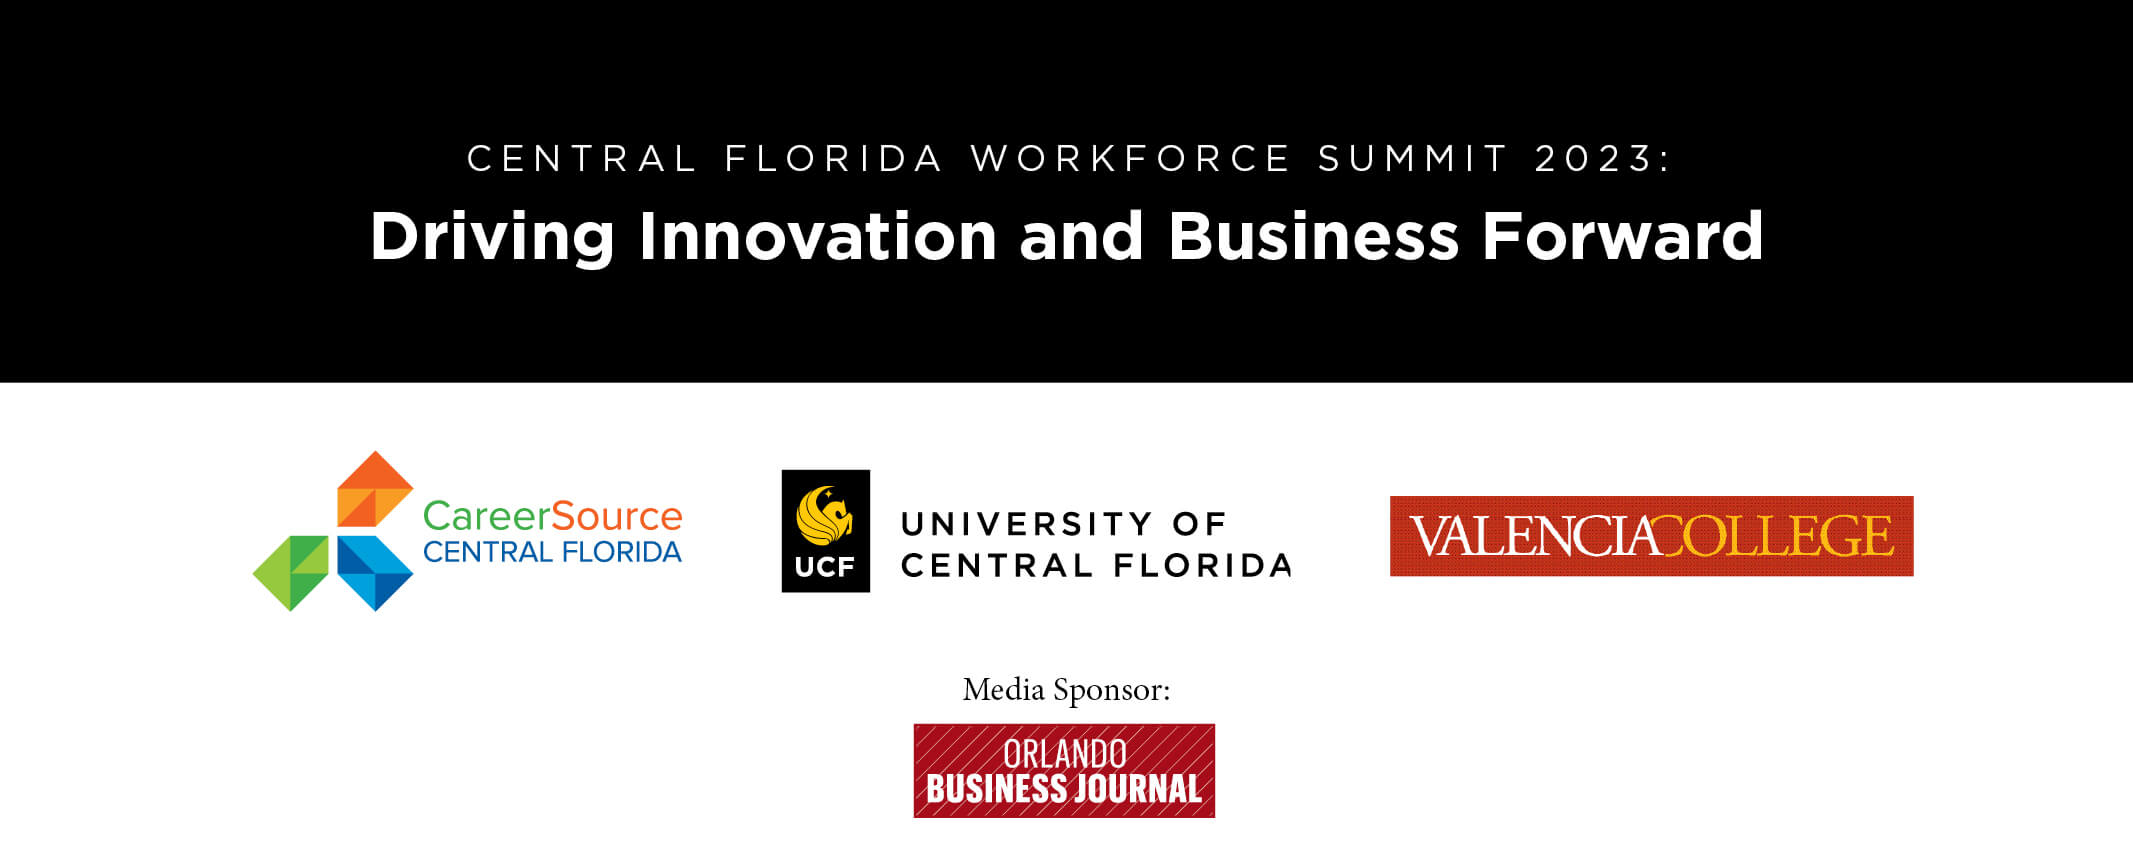 Workforce Summit partners - CareerSource Central Florida, UCF, Valencia College